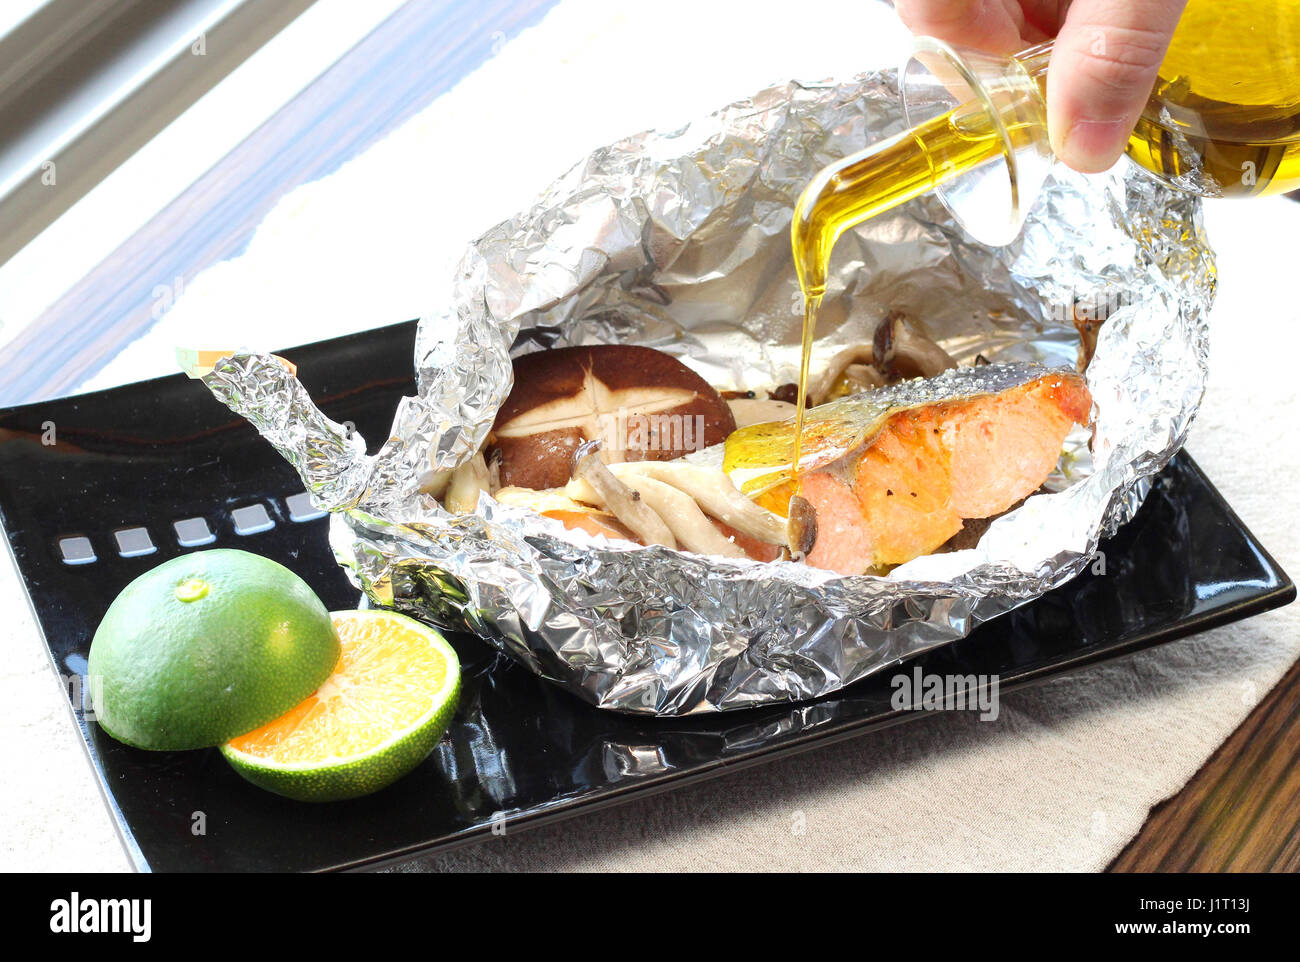 Mixing cod fillet with mushroom in foil for grilling on black platter with lemon Stock Photo